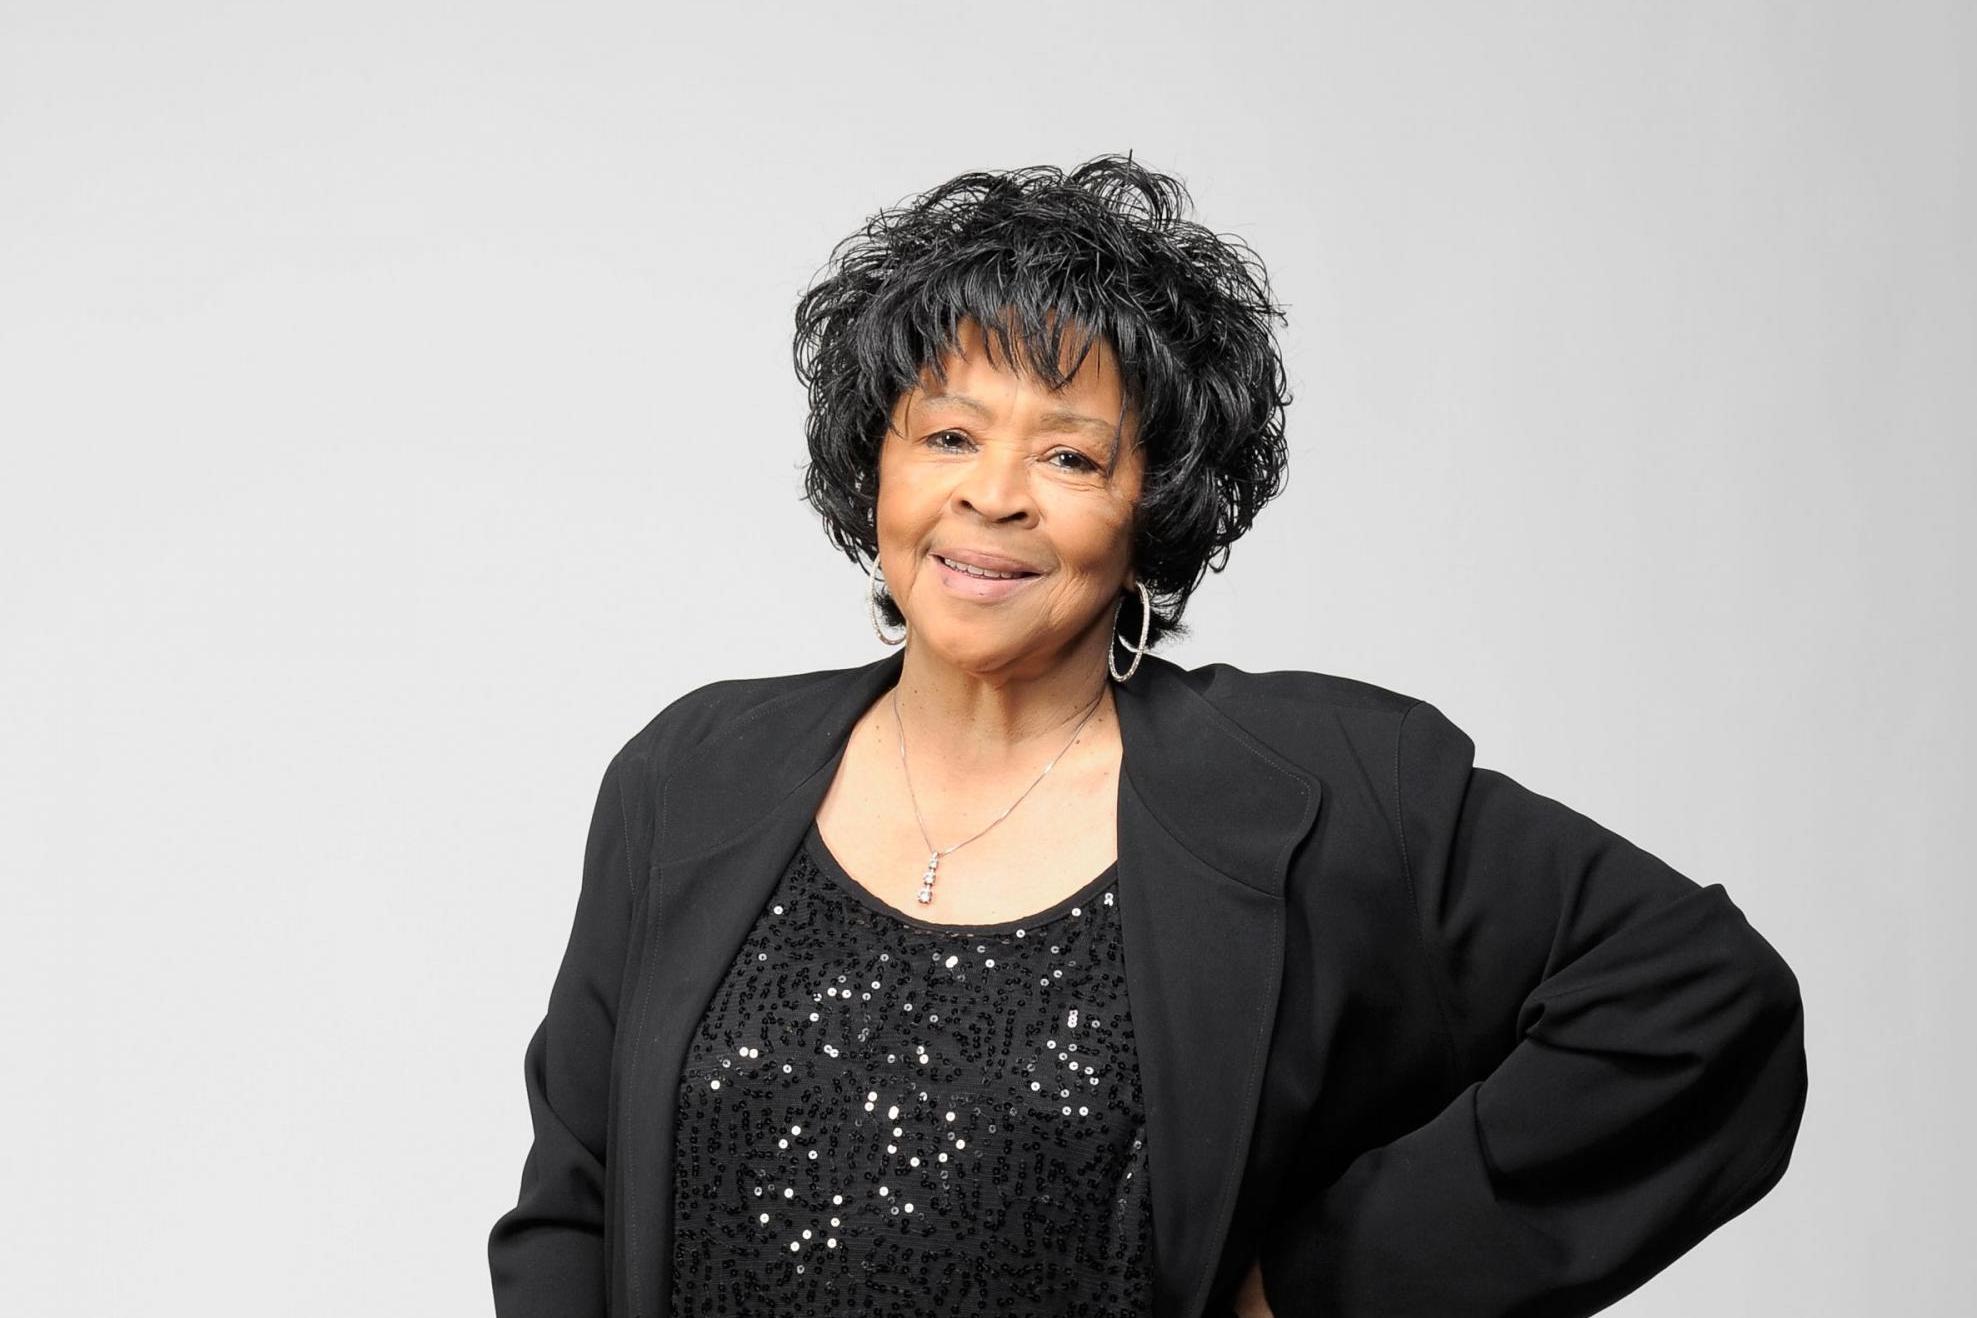 Yvonne Staples of The Staple Singers. Credit: Charley Gallay/Getty Images for NAACP Image Awards